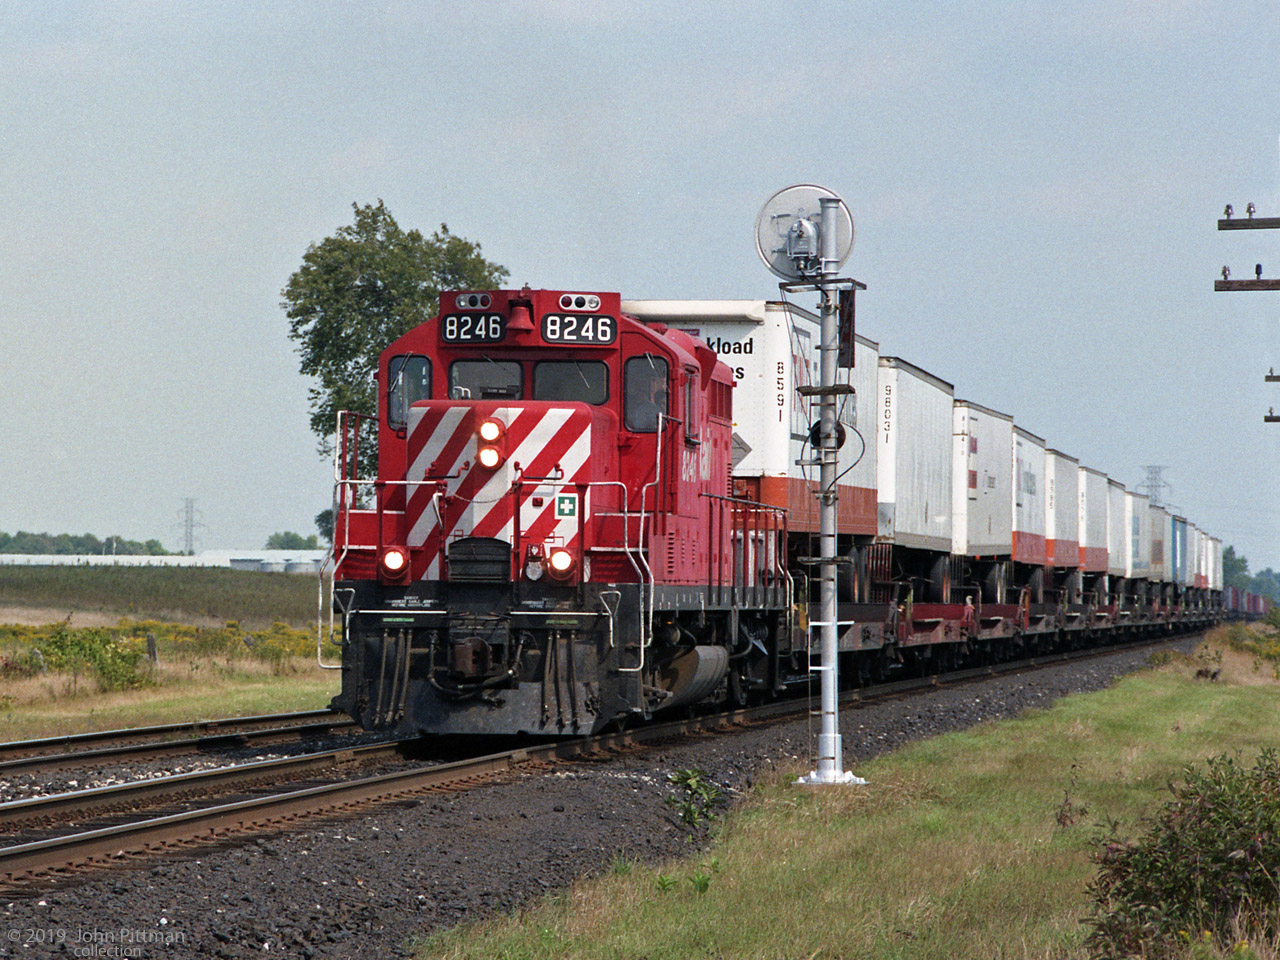 Remanufactured GP9u CP 8246 has a westbound train of at least 16 trailers on flat cars - the majority in TNT colours. 
It appears to be proceeding forward on the main after a signal stop that allowed an eastbound past on Nissouri siding. Part of the eastbound train can be seen at the right, beyond the piggyback train.